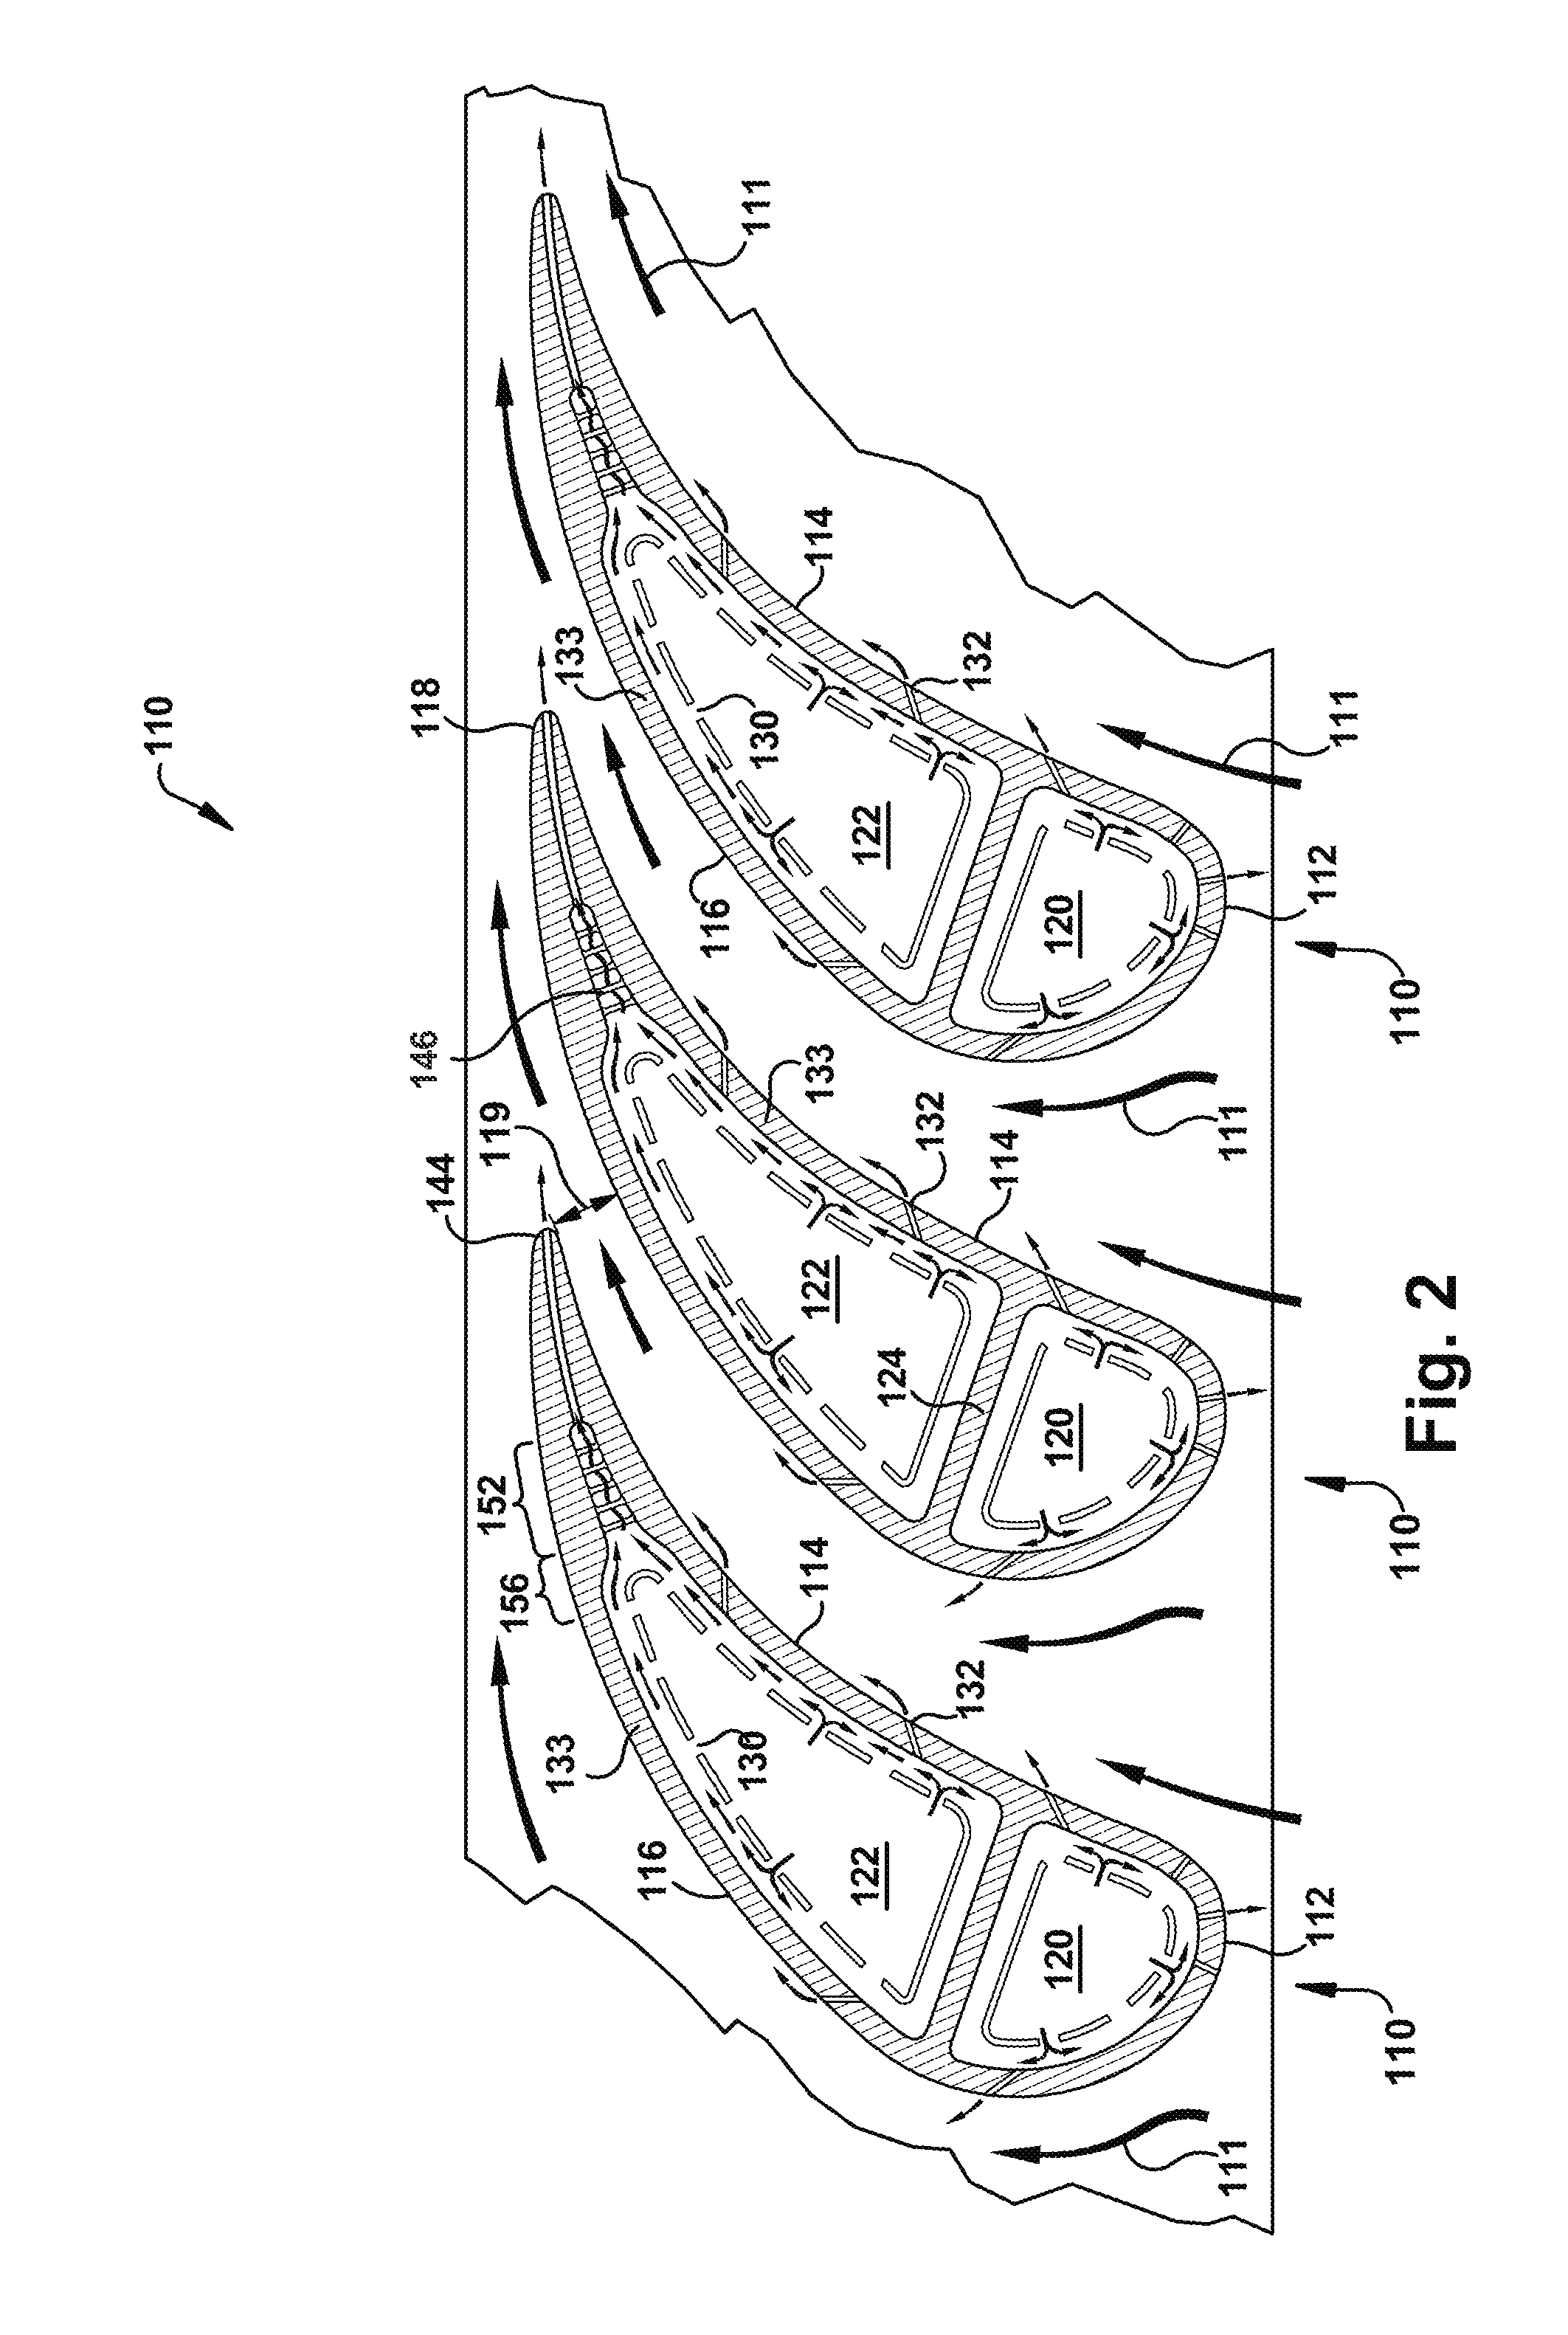 Turbine blade cooling with a hollow airfoil configured to minimize a distance between a pin array section and the trailing edge of the air foil